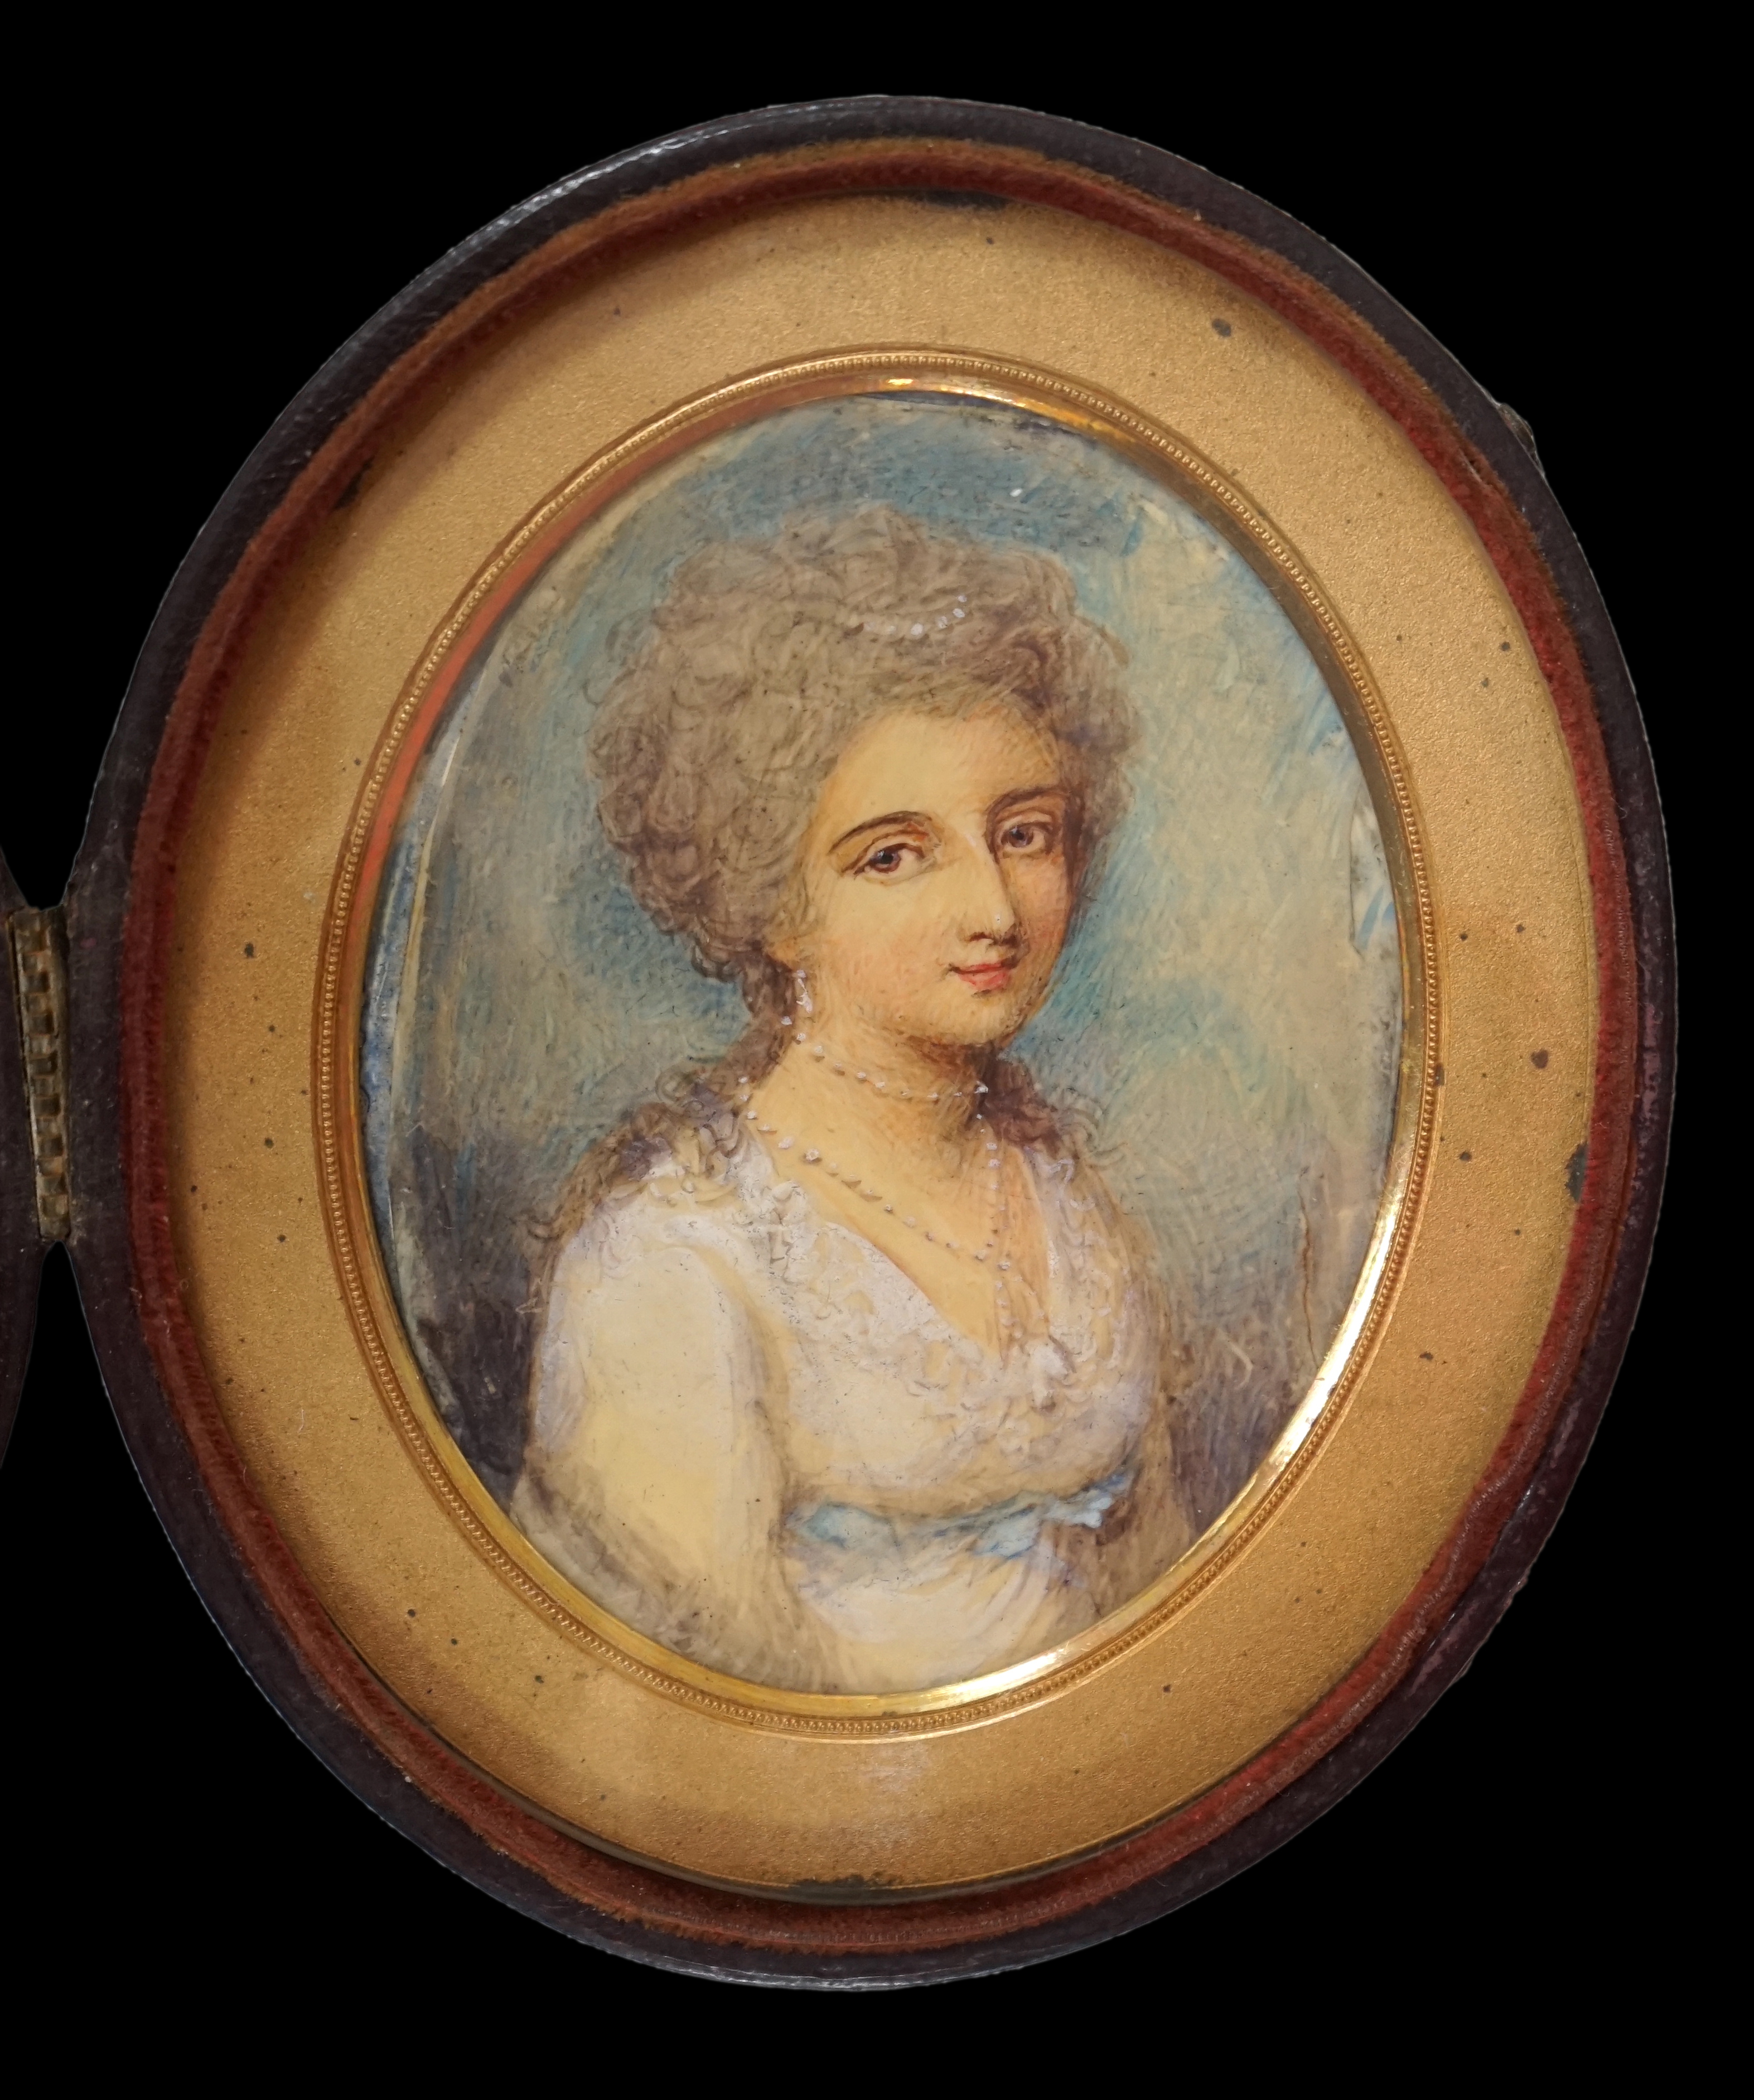 English School circa 1820, Portrait miniature of a lady, watercolour on ivory, 8.6 x 7cm. CITES Submission reference FTSLKJNX